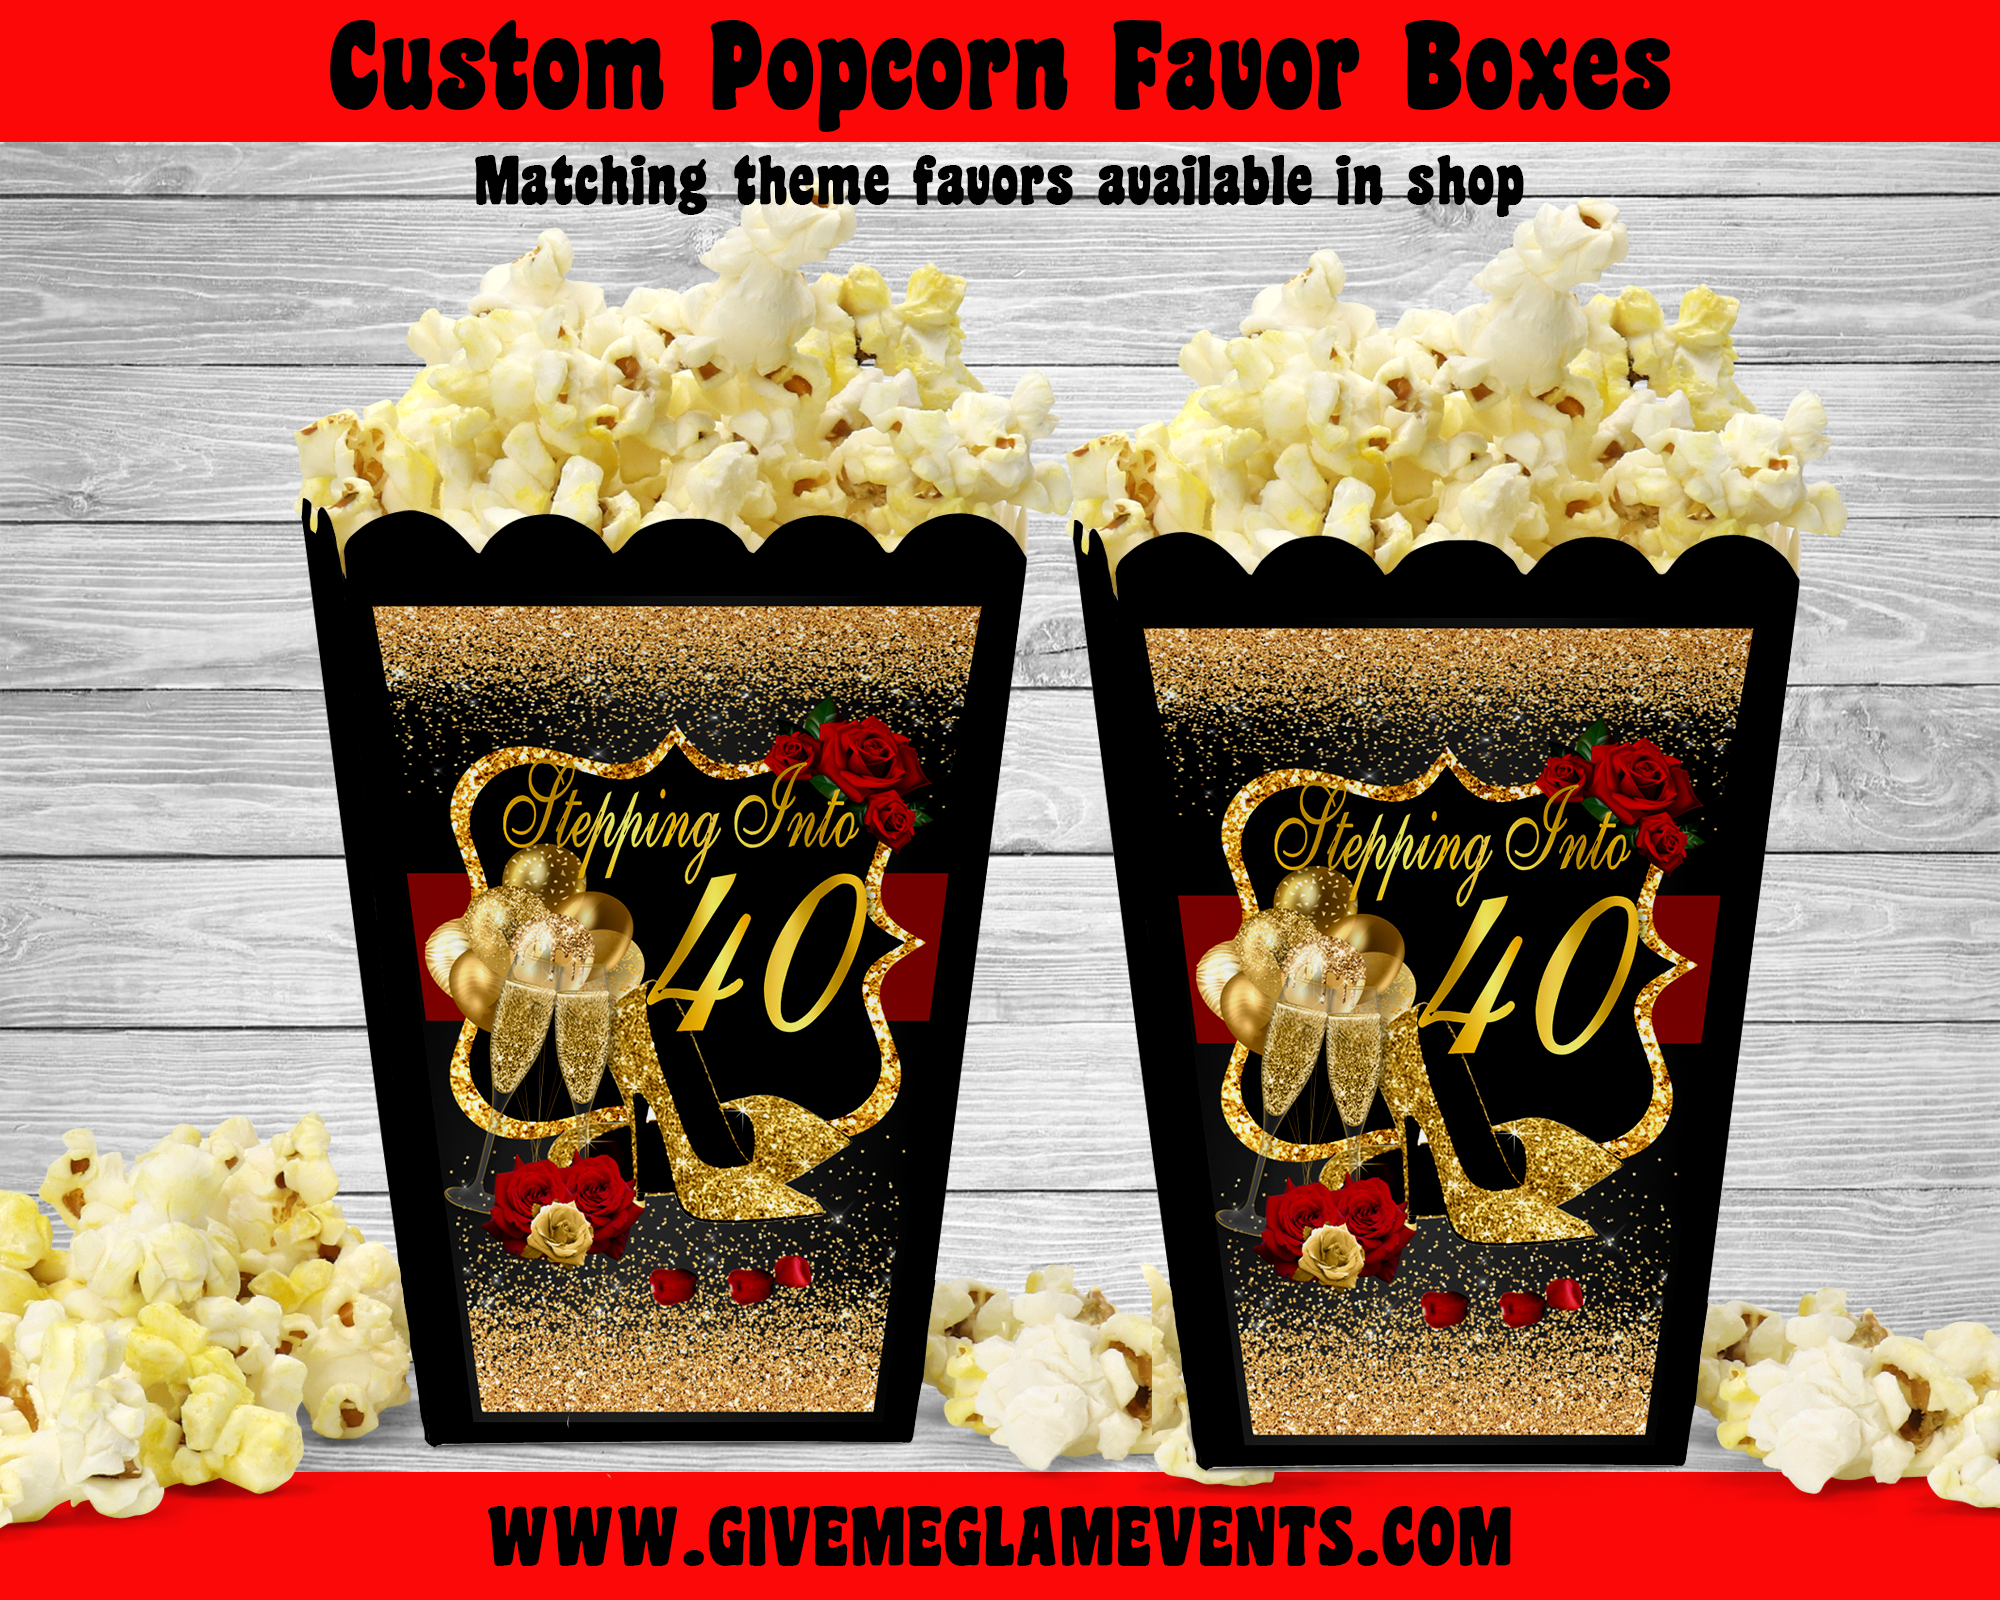 Stepping Into 40 Popcorn Boxes Treat Candy Favor Boxes & Labels Digital, Printed, Assembled